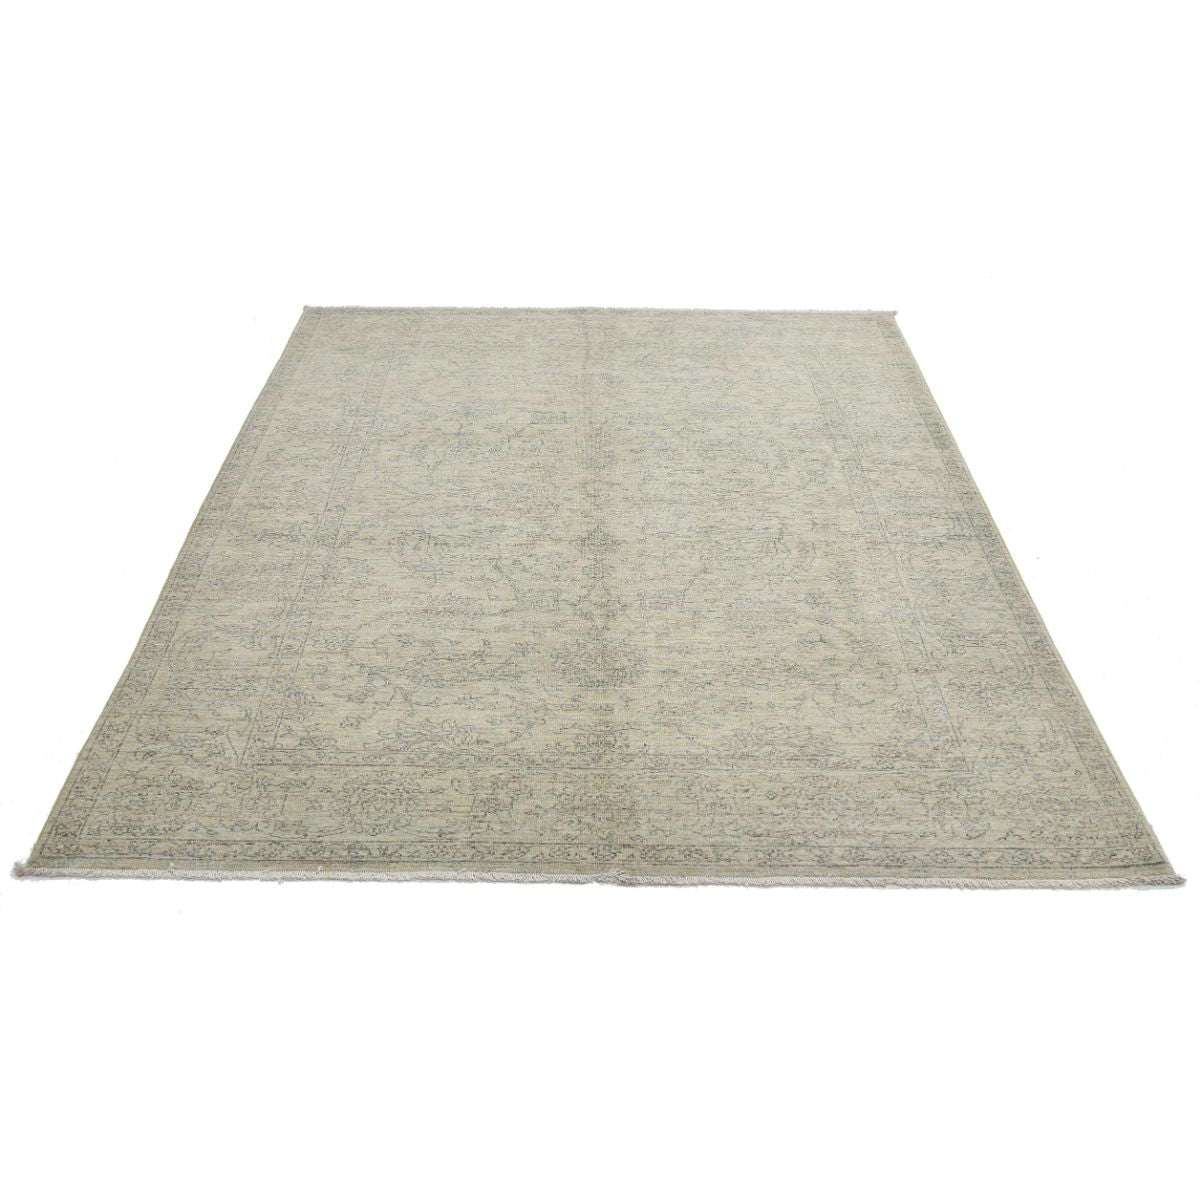 Serenity 5'8" X 7'6" Wool Hand-Knotted Rug